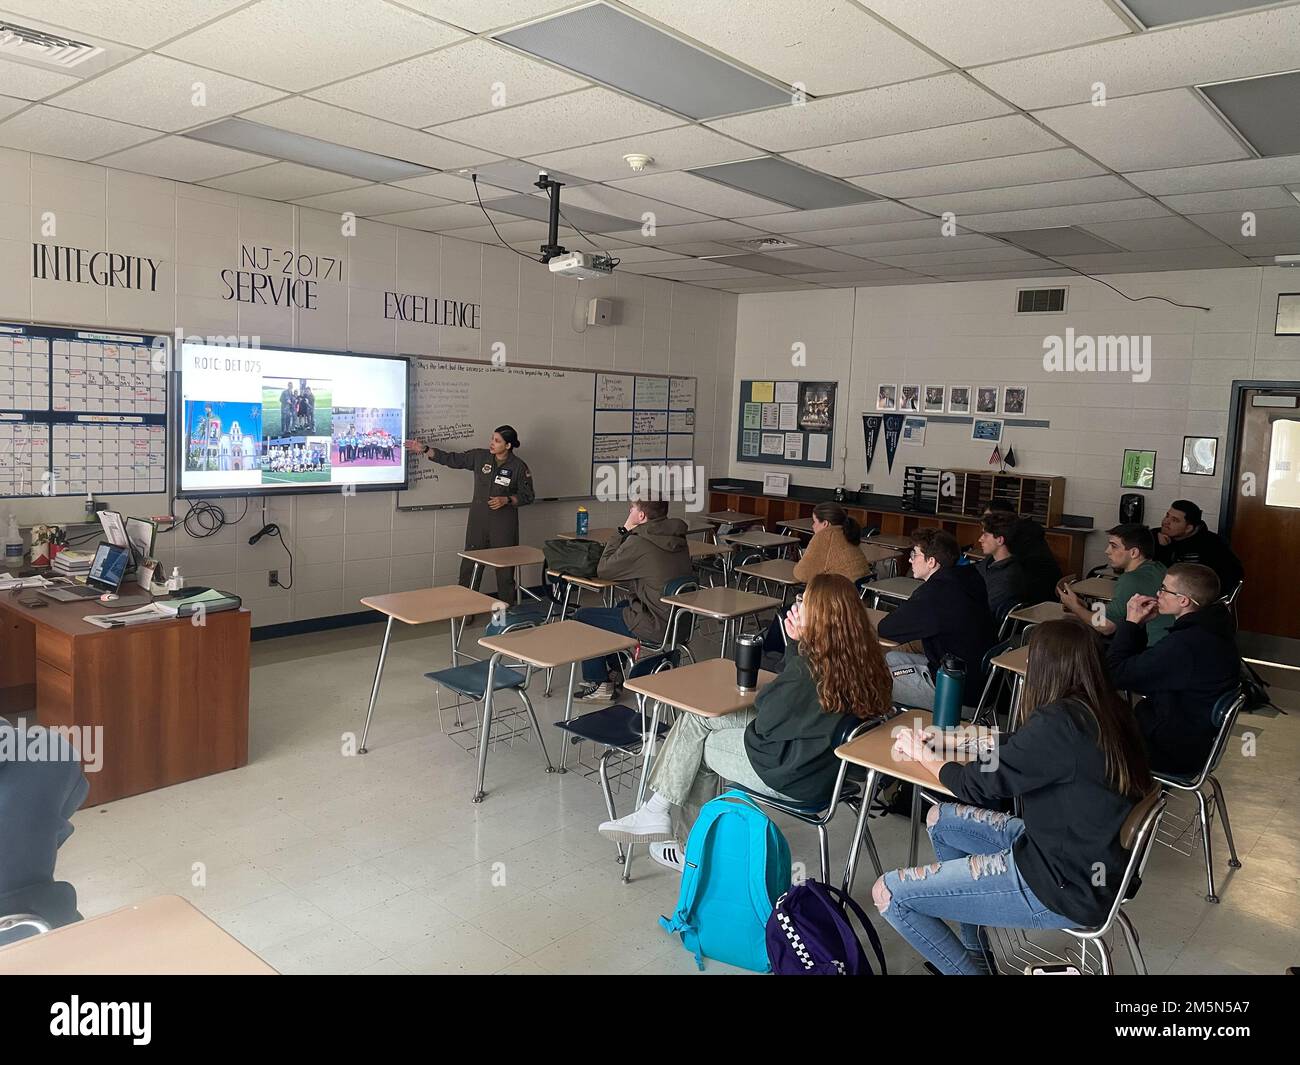 U.S. Air Force Capt. Irlanda Rodriguez from the 6th Airlift Squadron gives a presentation to level 300 and level 400 JROTC students on AIM High, North Burlington High school, New Jersey, Mar. 28, 2022. AIM Hight is an AFRS Detachment 1 mission geared towards informing, influencing, and inspiring tomorrow’s leaders through innovative outreach opportunities. Stock Photo